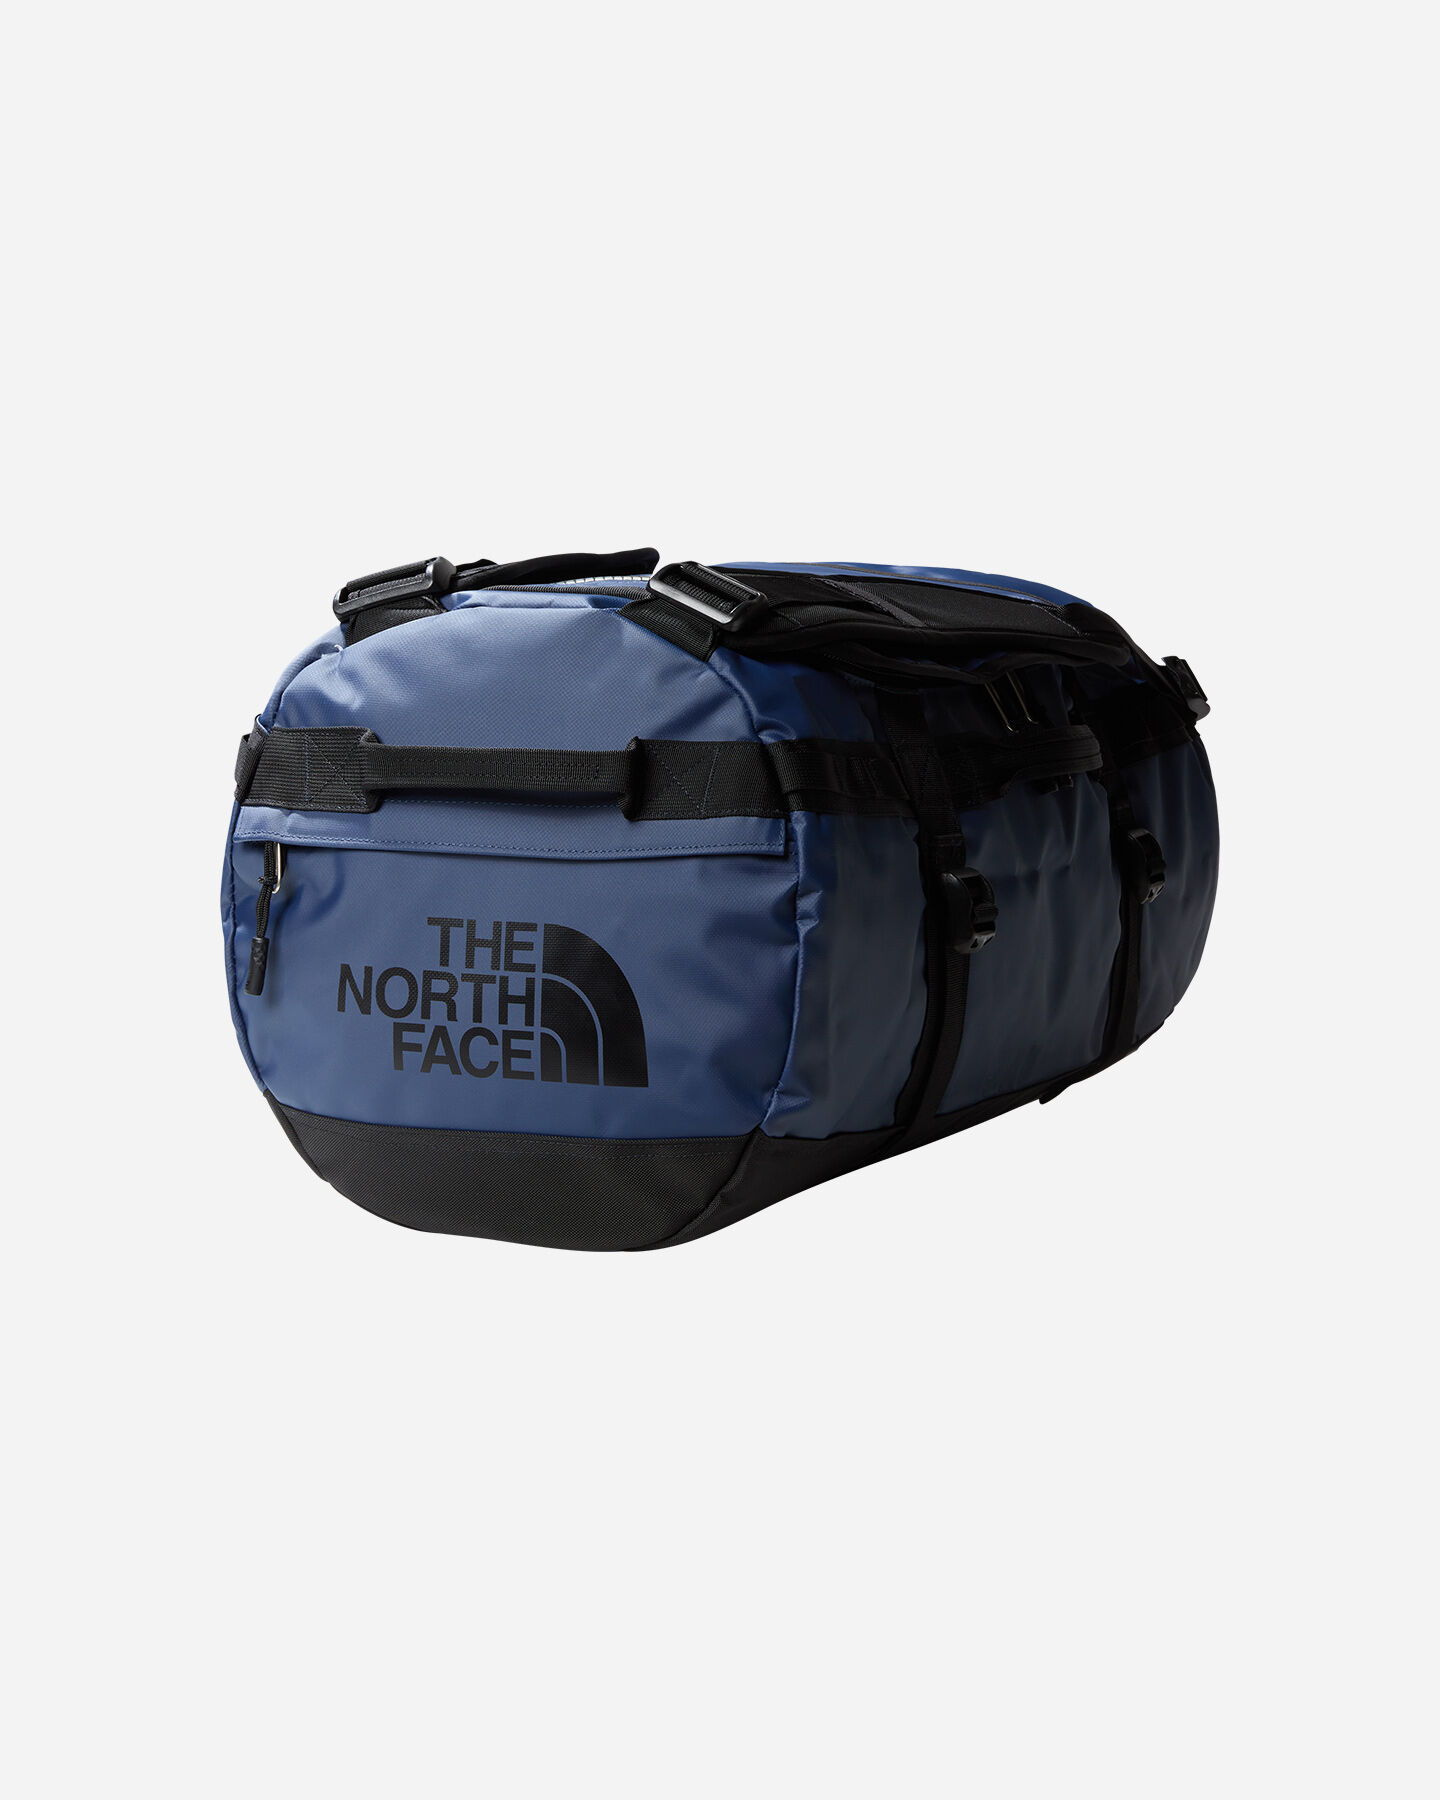  Borsa THE NORTH FACE BASE CAMP DUFFEL SUMMIT S S5535913|92A|OS scatto 0